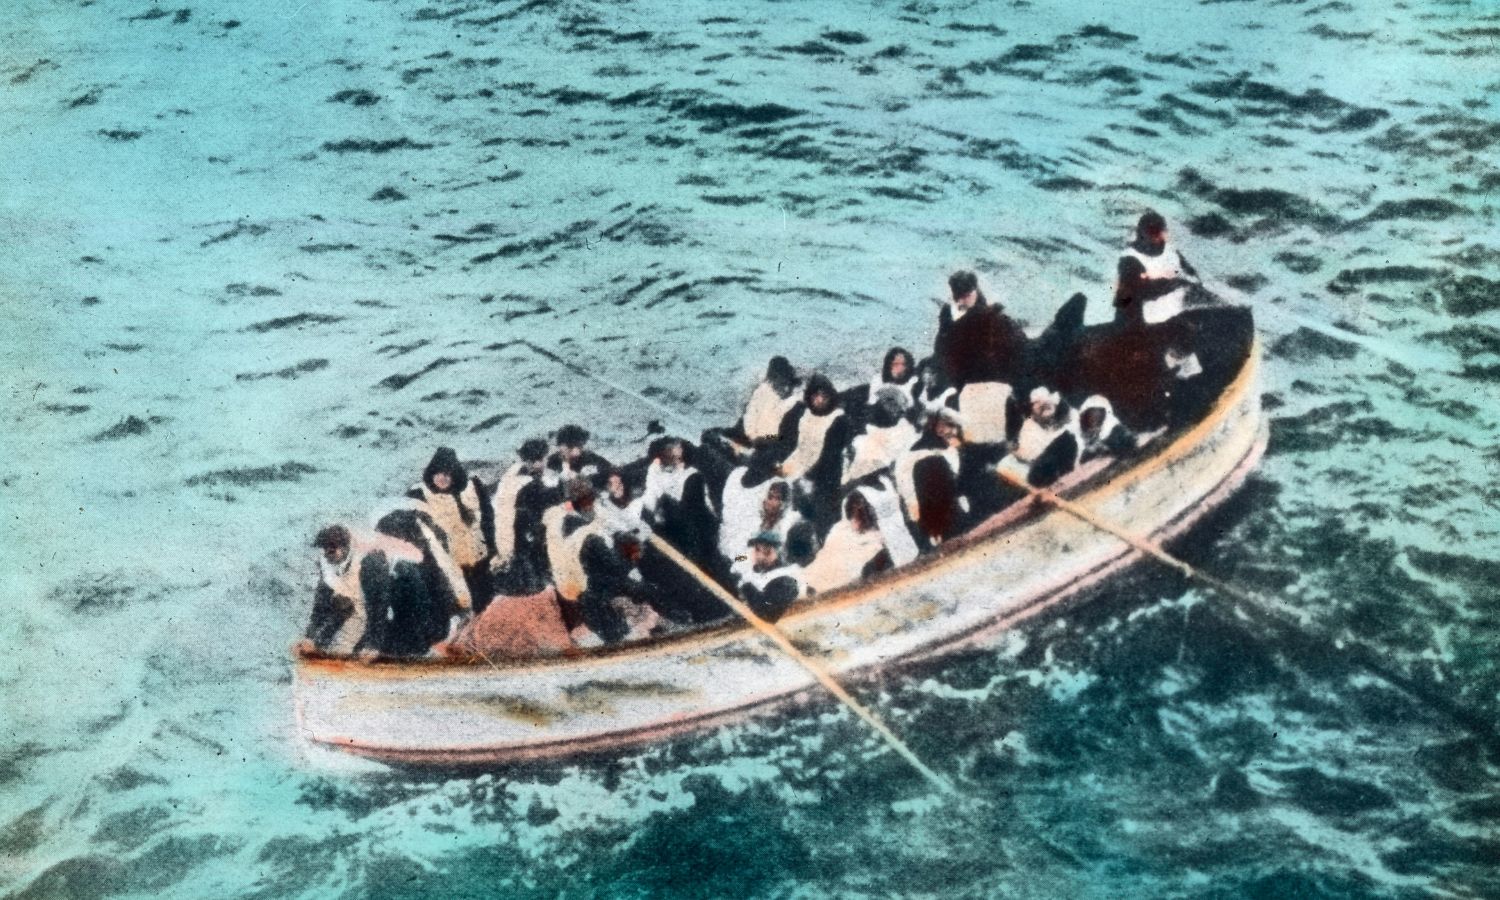 An image showing passengers arriving on the RMS Carpathia from the Titanic